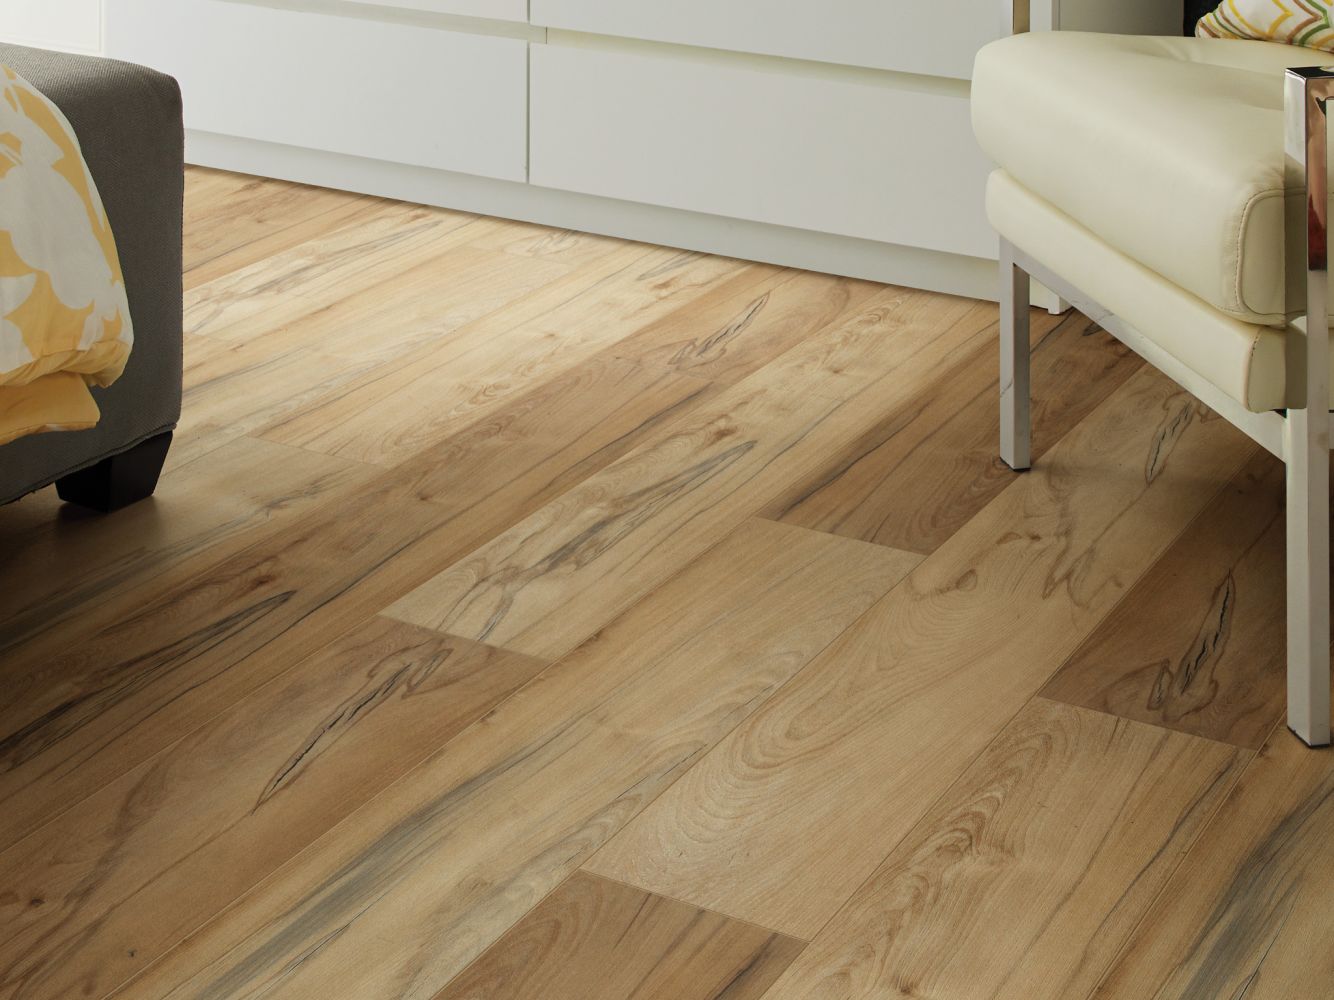 Shaw Floors Resilient Property Solutions Colossus HD + Imperial Beech 00185_VE243